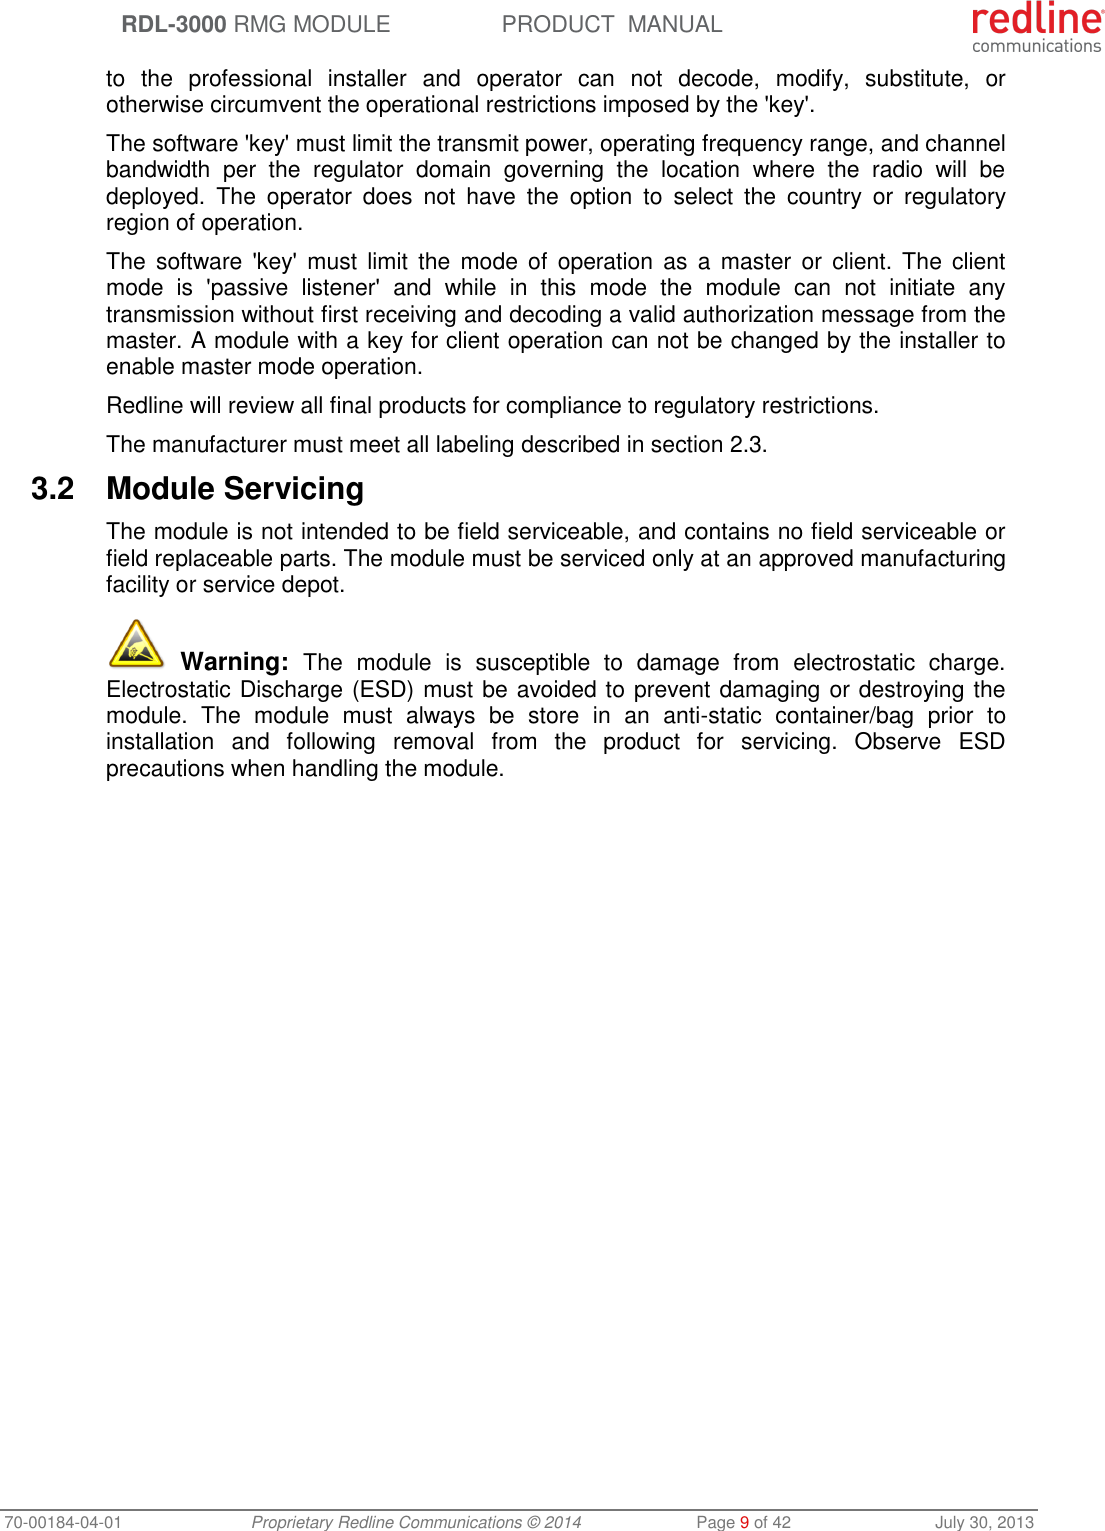  RDL-3000 RMG MODULE PRODUCT  MANUAL 70-00184-04-01 Proprietary Redline Communications © 2014  Page 9 of 42  July 30, 2013 to  the  professional  installer  and  operator  can  not  decode,  modify,  substitute,  or otherwise circumvent the operational restrictions imposed by the &apos;key&apos;.  The software &apos;key&apos; must limit the transmit power, operating frequency range, and channel bandwidth  per  the  regulator  domain  governing  the  location  where  the  radio  will  be deployed.  The  operator  does  not  have  the  option  to  select  the  country  or  regulatory region of operation. The  software &apos;key&apos;  must  limit  the  mode  of  operation  as  a  master  or  client. The  client mode  is  &apos;passive  listener&apos;  and  while  in  this  mode  the  module  can  not  initiate  any transmission without first receiving and decoding a valid authorization message from the master. A module with a key for client operation can not be changed by the installer to enable master mode operation. Redline will review all final products for compliance to regulatory restrictions. The manufacturer must meet all labeling described in section 2.3. 3.2  Module Servicing The module is not intended to be field serviceable, and contains no field serviceable or field replaceable parts. The module must be serviced only at an approved manufacturing facility or service depot.  Warning:  The  module  is  susceptible  to  damage  from  electrostatic  charge. Electrostatic Discharge (ESD) must be avoided to prevent damaging or destroying the module.  The  module  must  always  be  store  in  an  anti-static  container/bag  prior  to installation  and  following  removal  from  the  product  for  servicing.  Observe  ESD precautions when handling the module. 